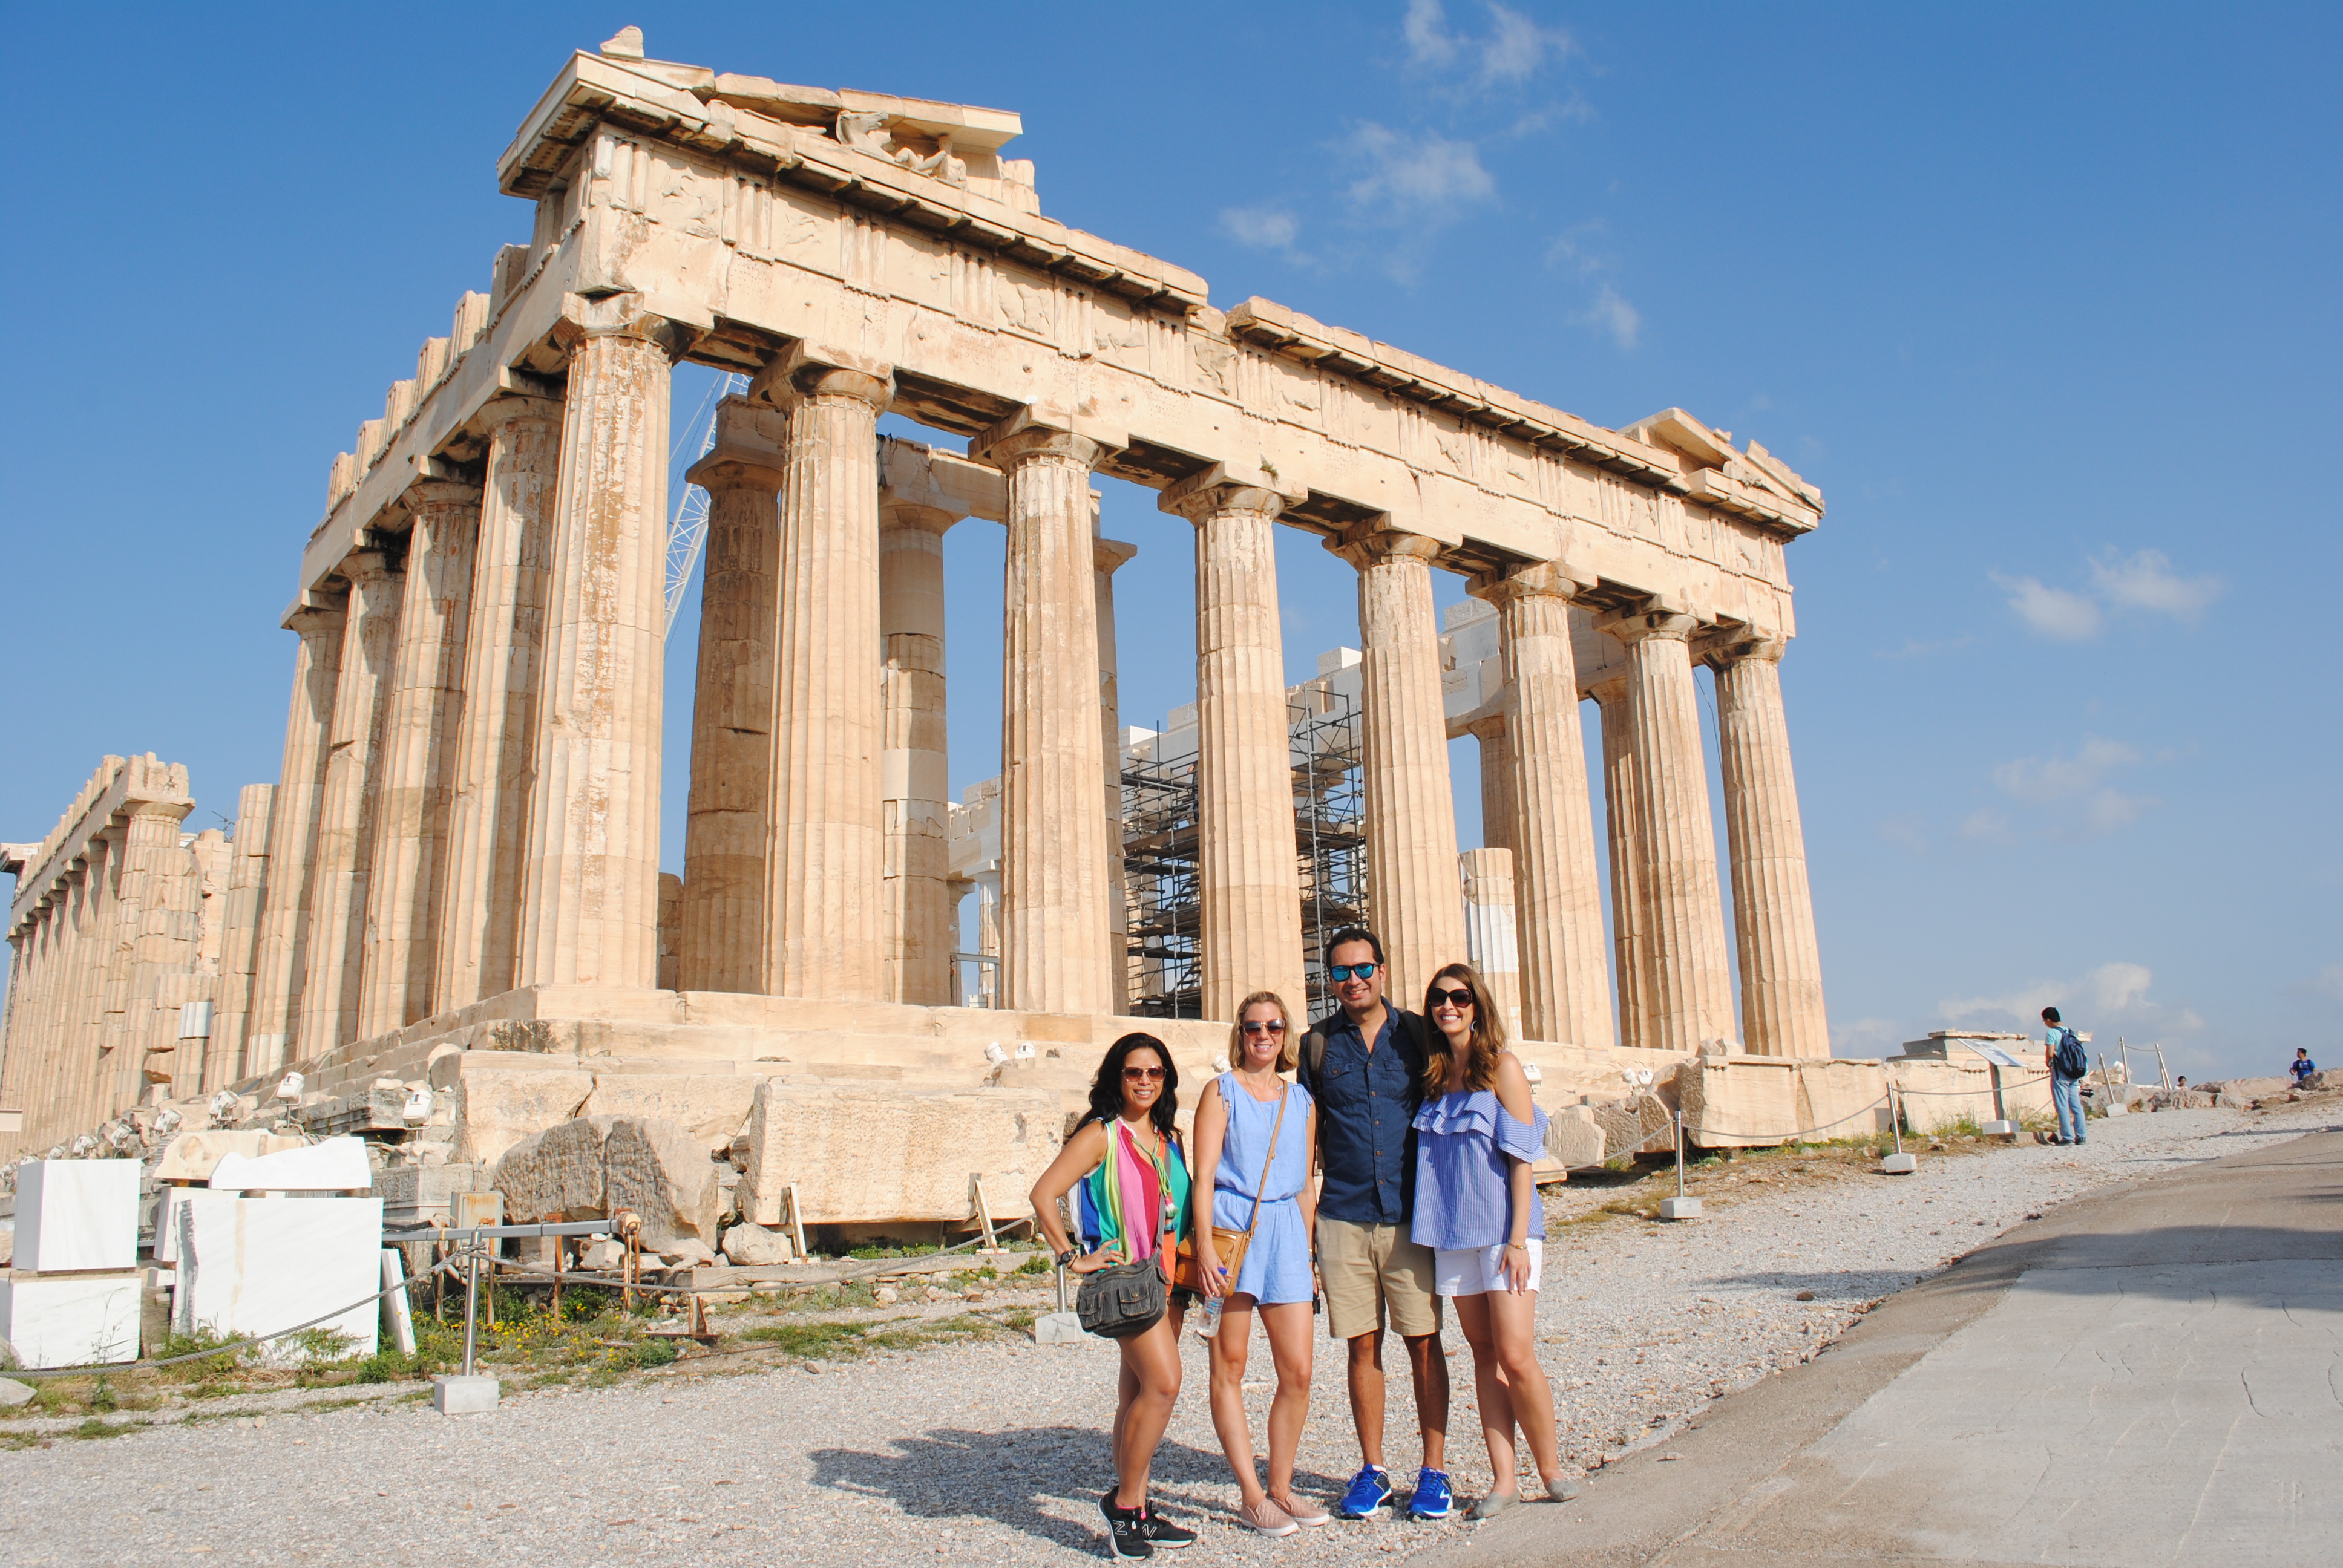 Visiting the Acropolis in Athens, Greece with friends